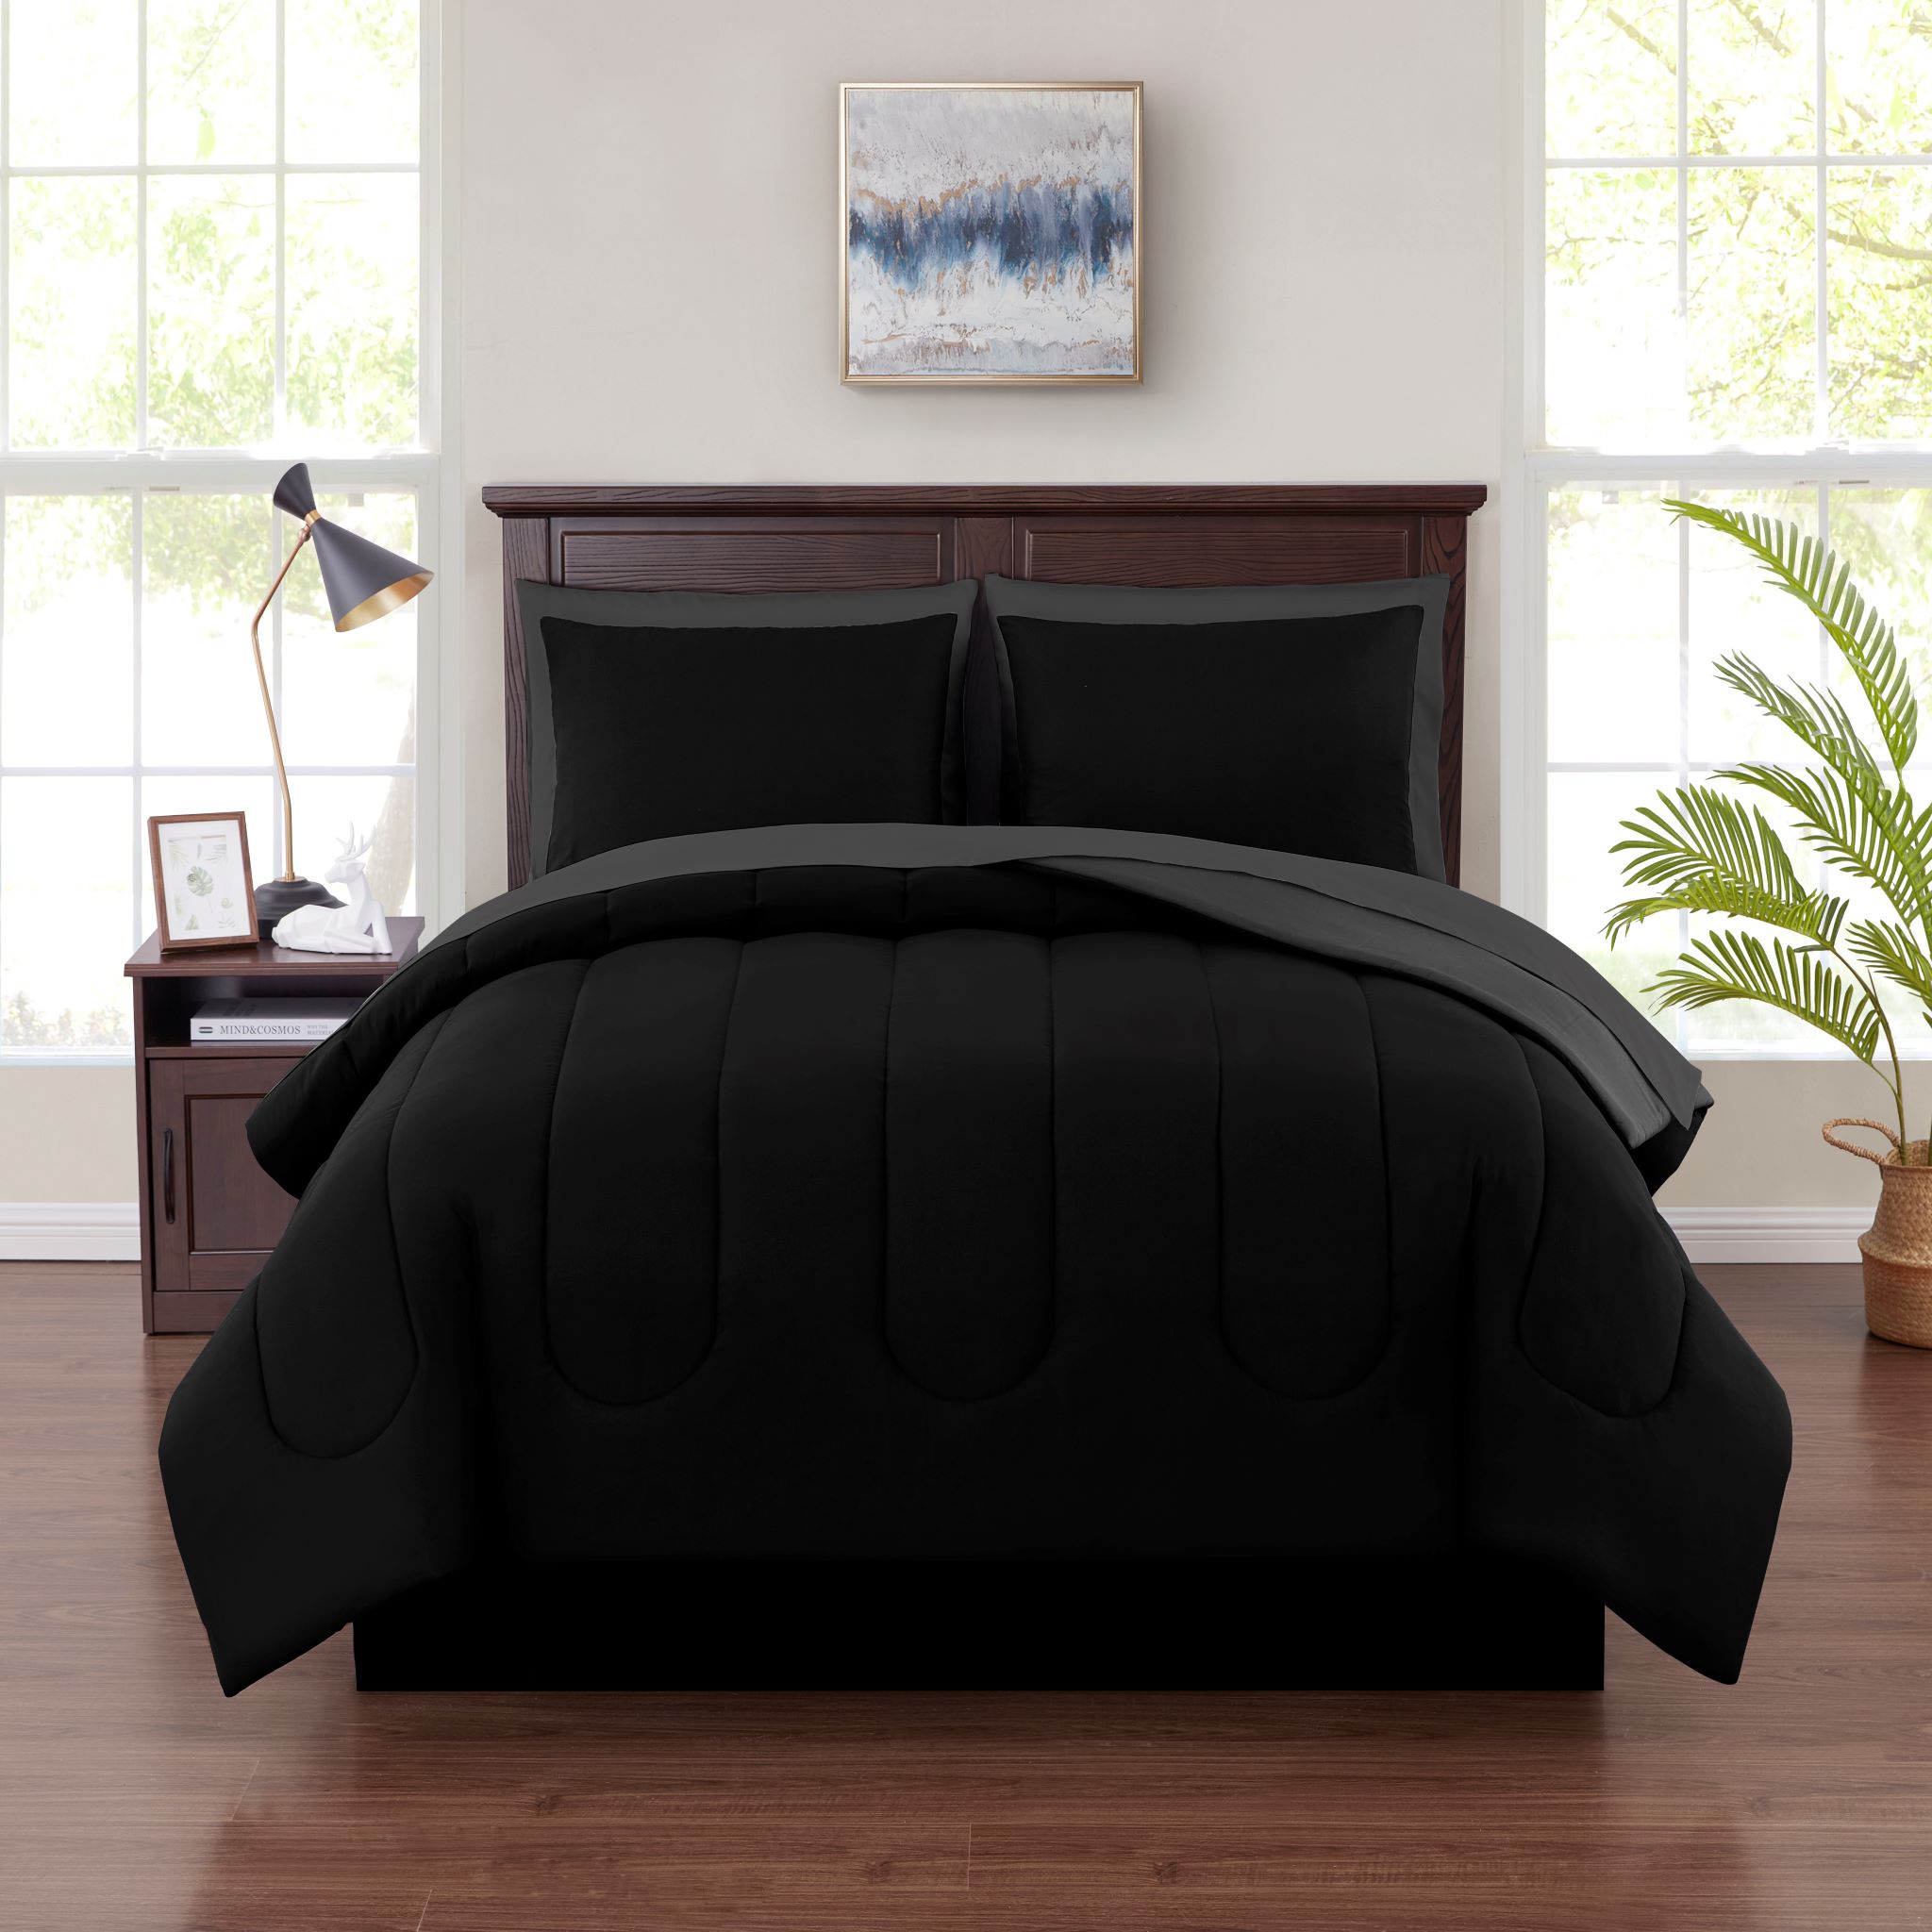 Mainstays Black Reversible 7-Piece Bed in a Bag Comforter Set with Sheets, Queen - image 1 of 8